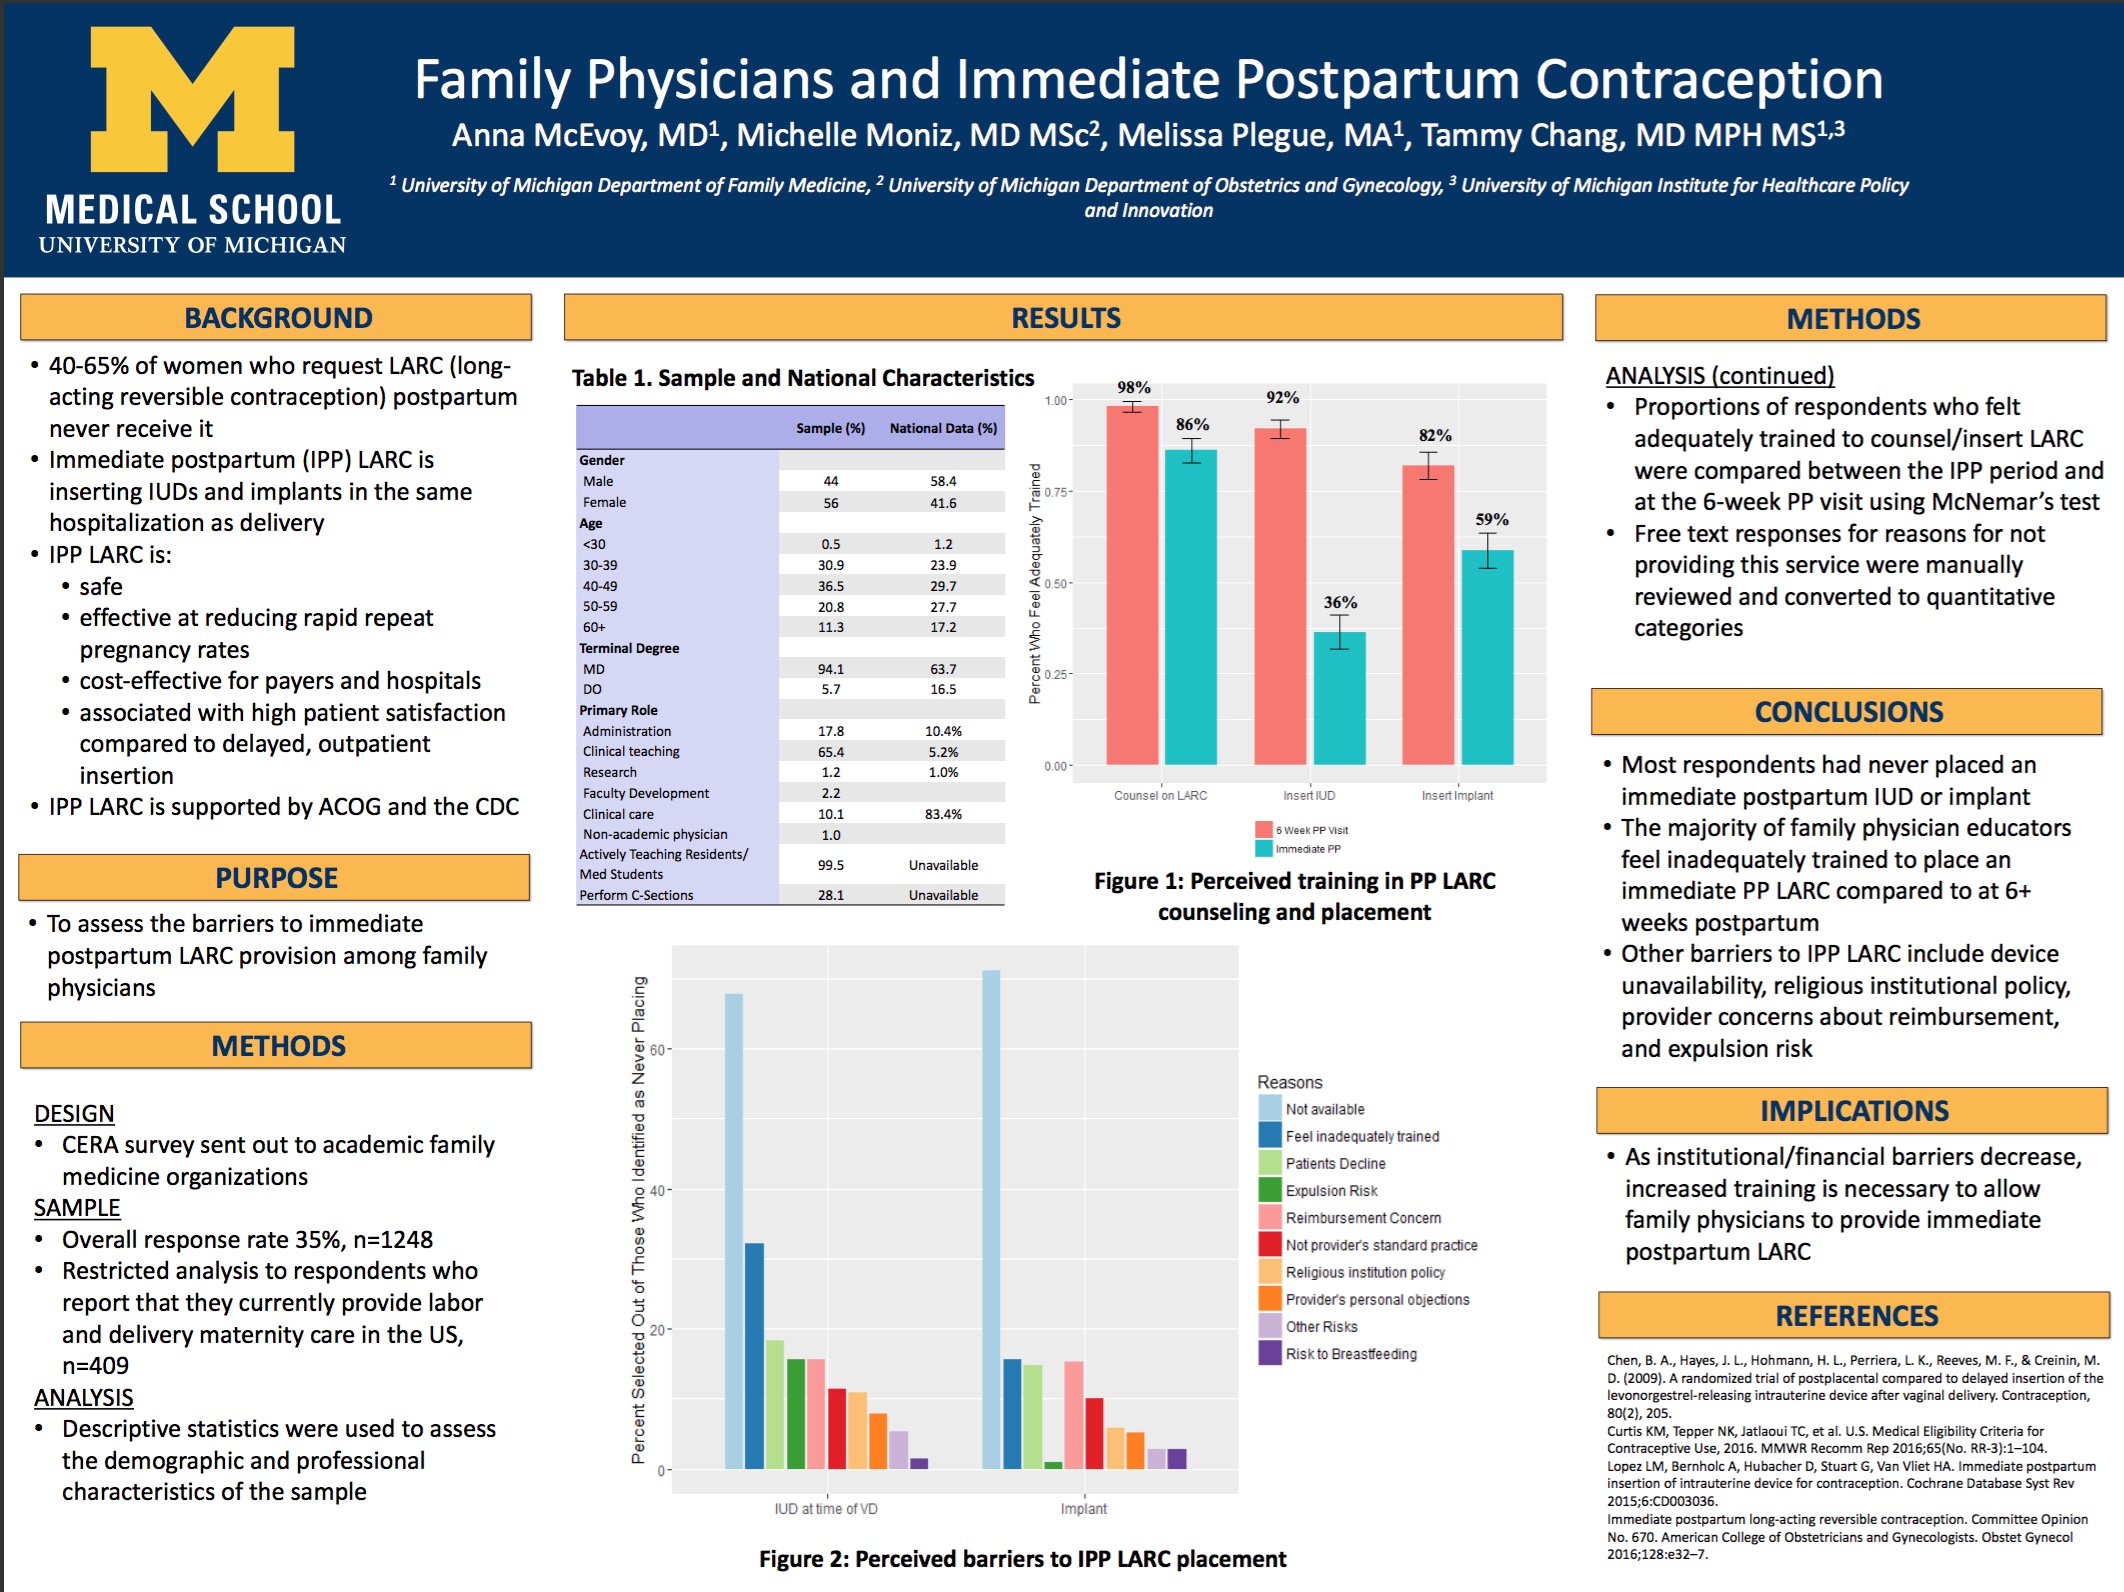 stfm 2017 conference poster by Dr. Anna McEvoy on Family Physicians and Immediate Postpartum Contraception